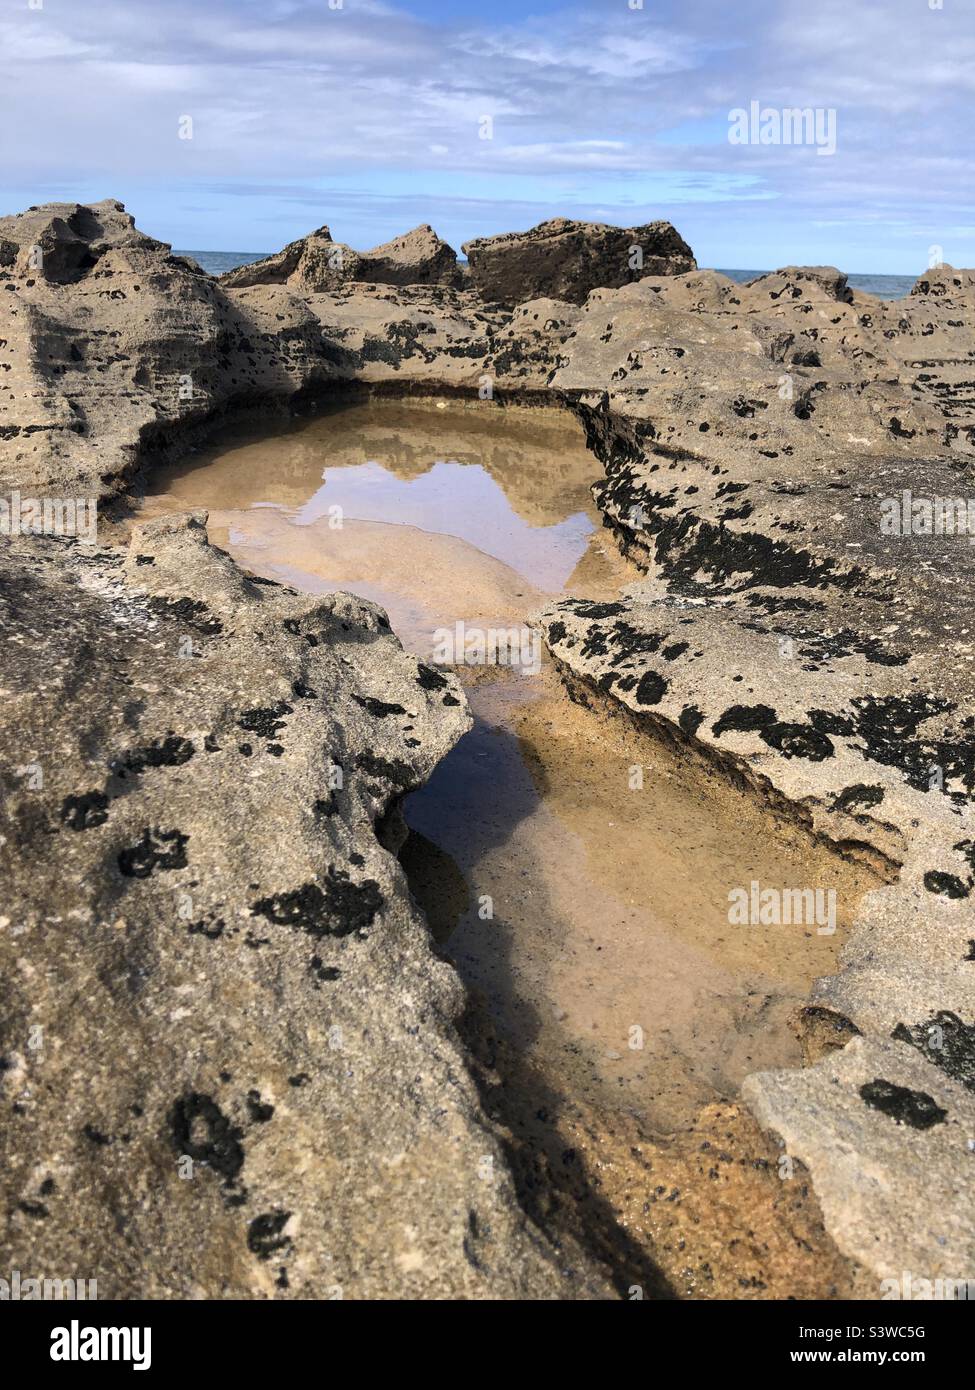 Rocks reflected in a pool of water. Stock Photo